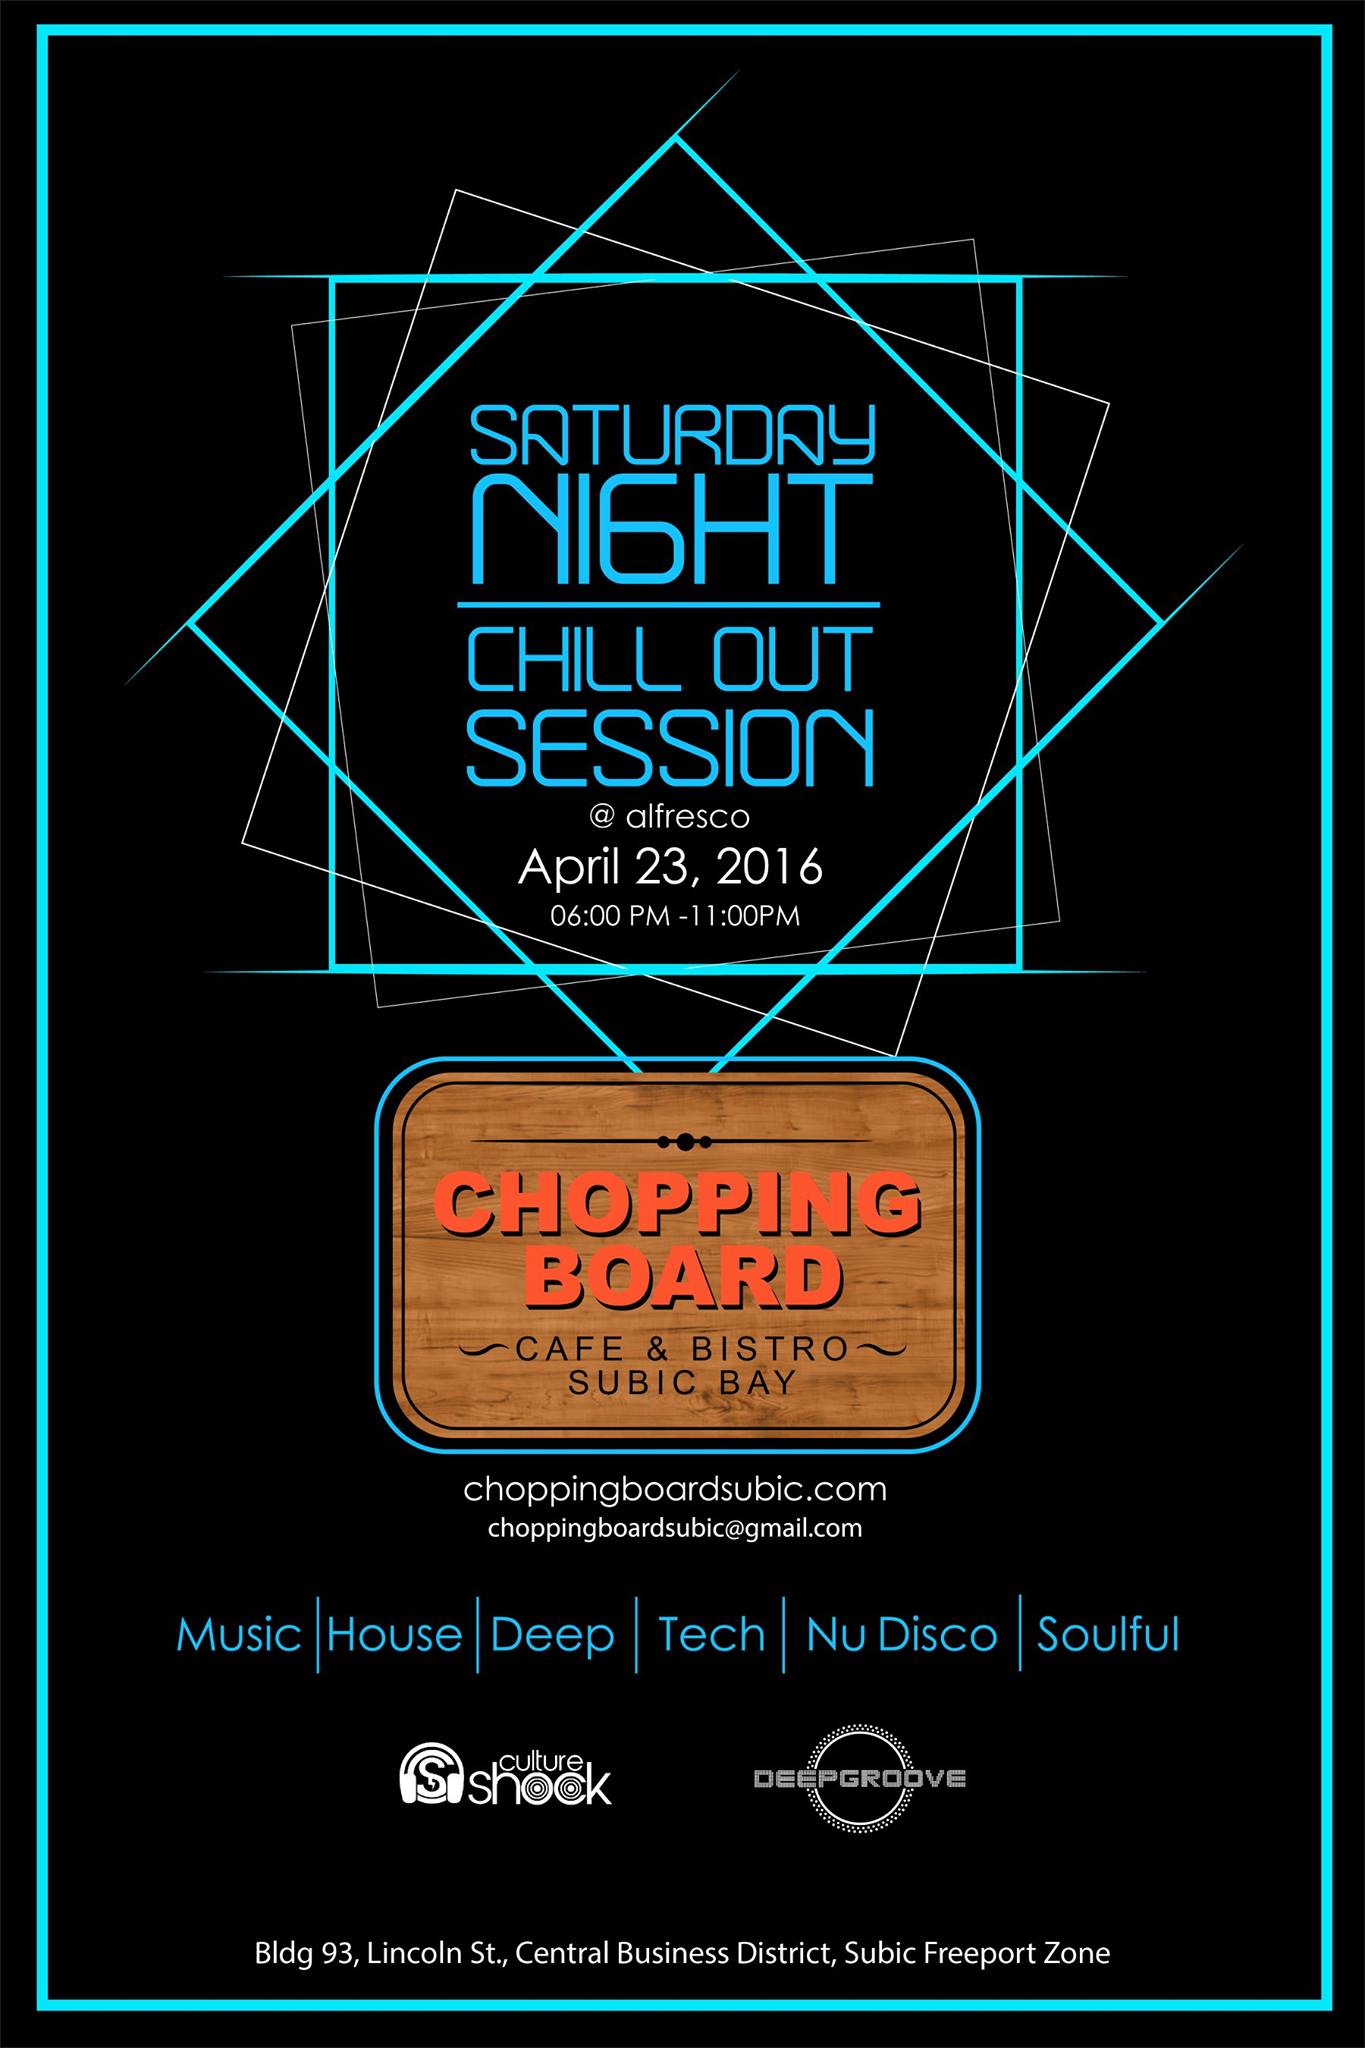 Kyle Garon April 20 · Culture Shock and Deep Groove Collective is all about bringing people closer to the Music. Giving up and coming talent a platform and throwing unique events where fans and artists can party together. We've prepared something special for the month of May. Check out Chopping Board SBFZ for Chill out Saturday at the alfresco area. smile emoticon #playmoreHOUSE #GrooveCulture ----- Kyle Garon 17 hrs · Allowed on Timeline Happy to have my new playground for House Music. Hope to see some familiar faces tomorrow inside SBMA. Good Music has no expiration date. #playmoreHOUSE #letsgodeep smile emoticon